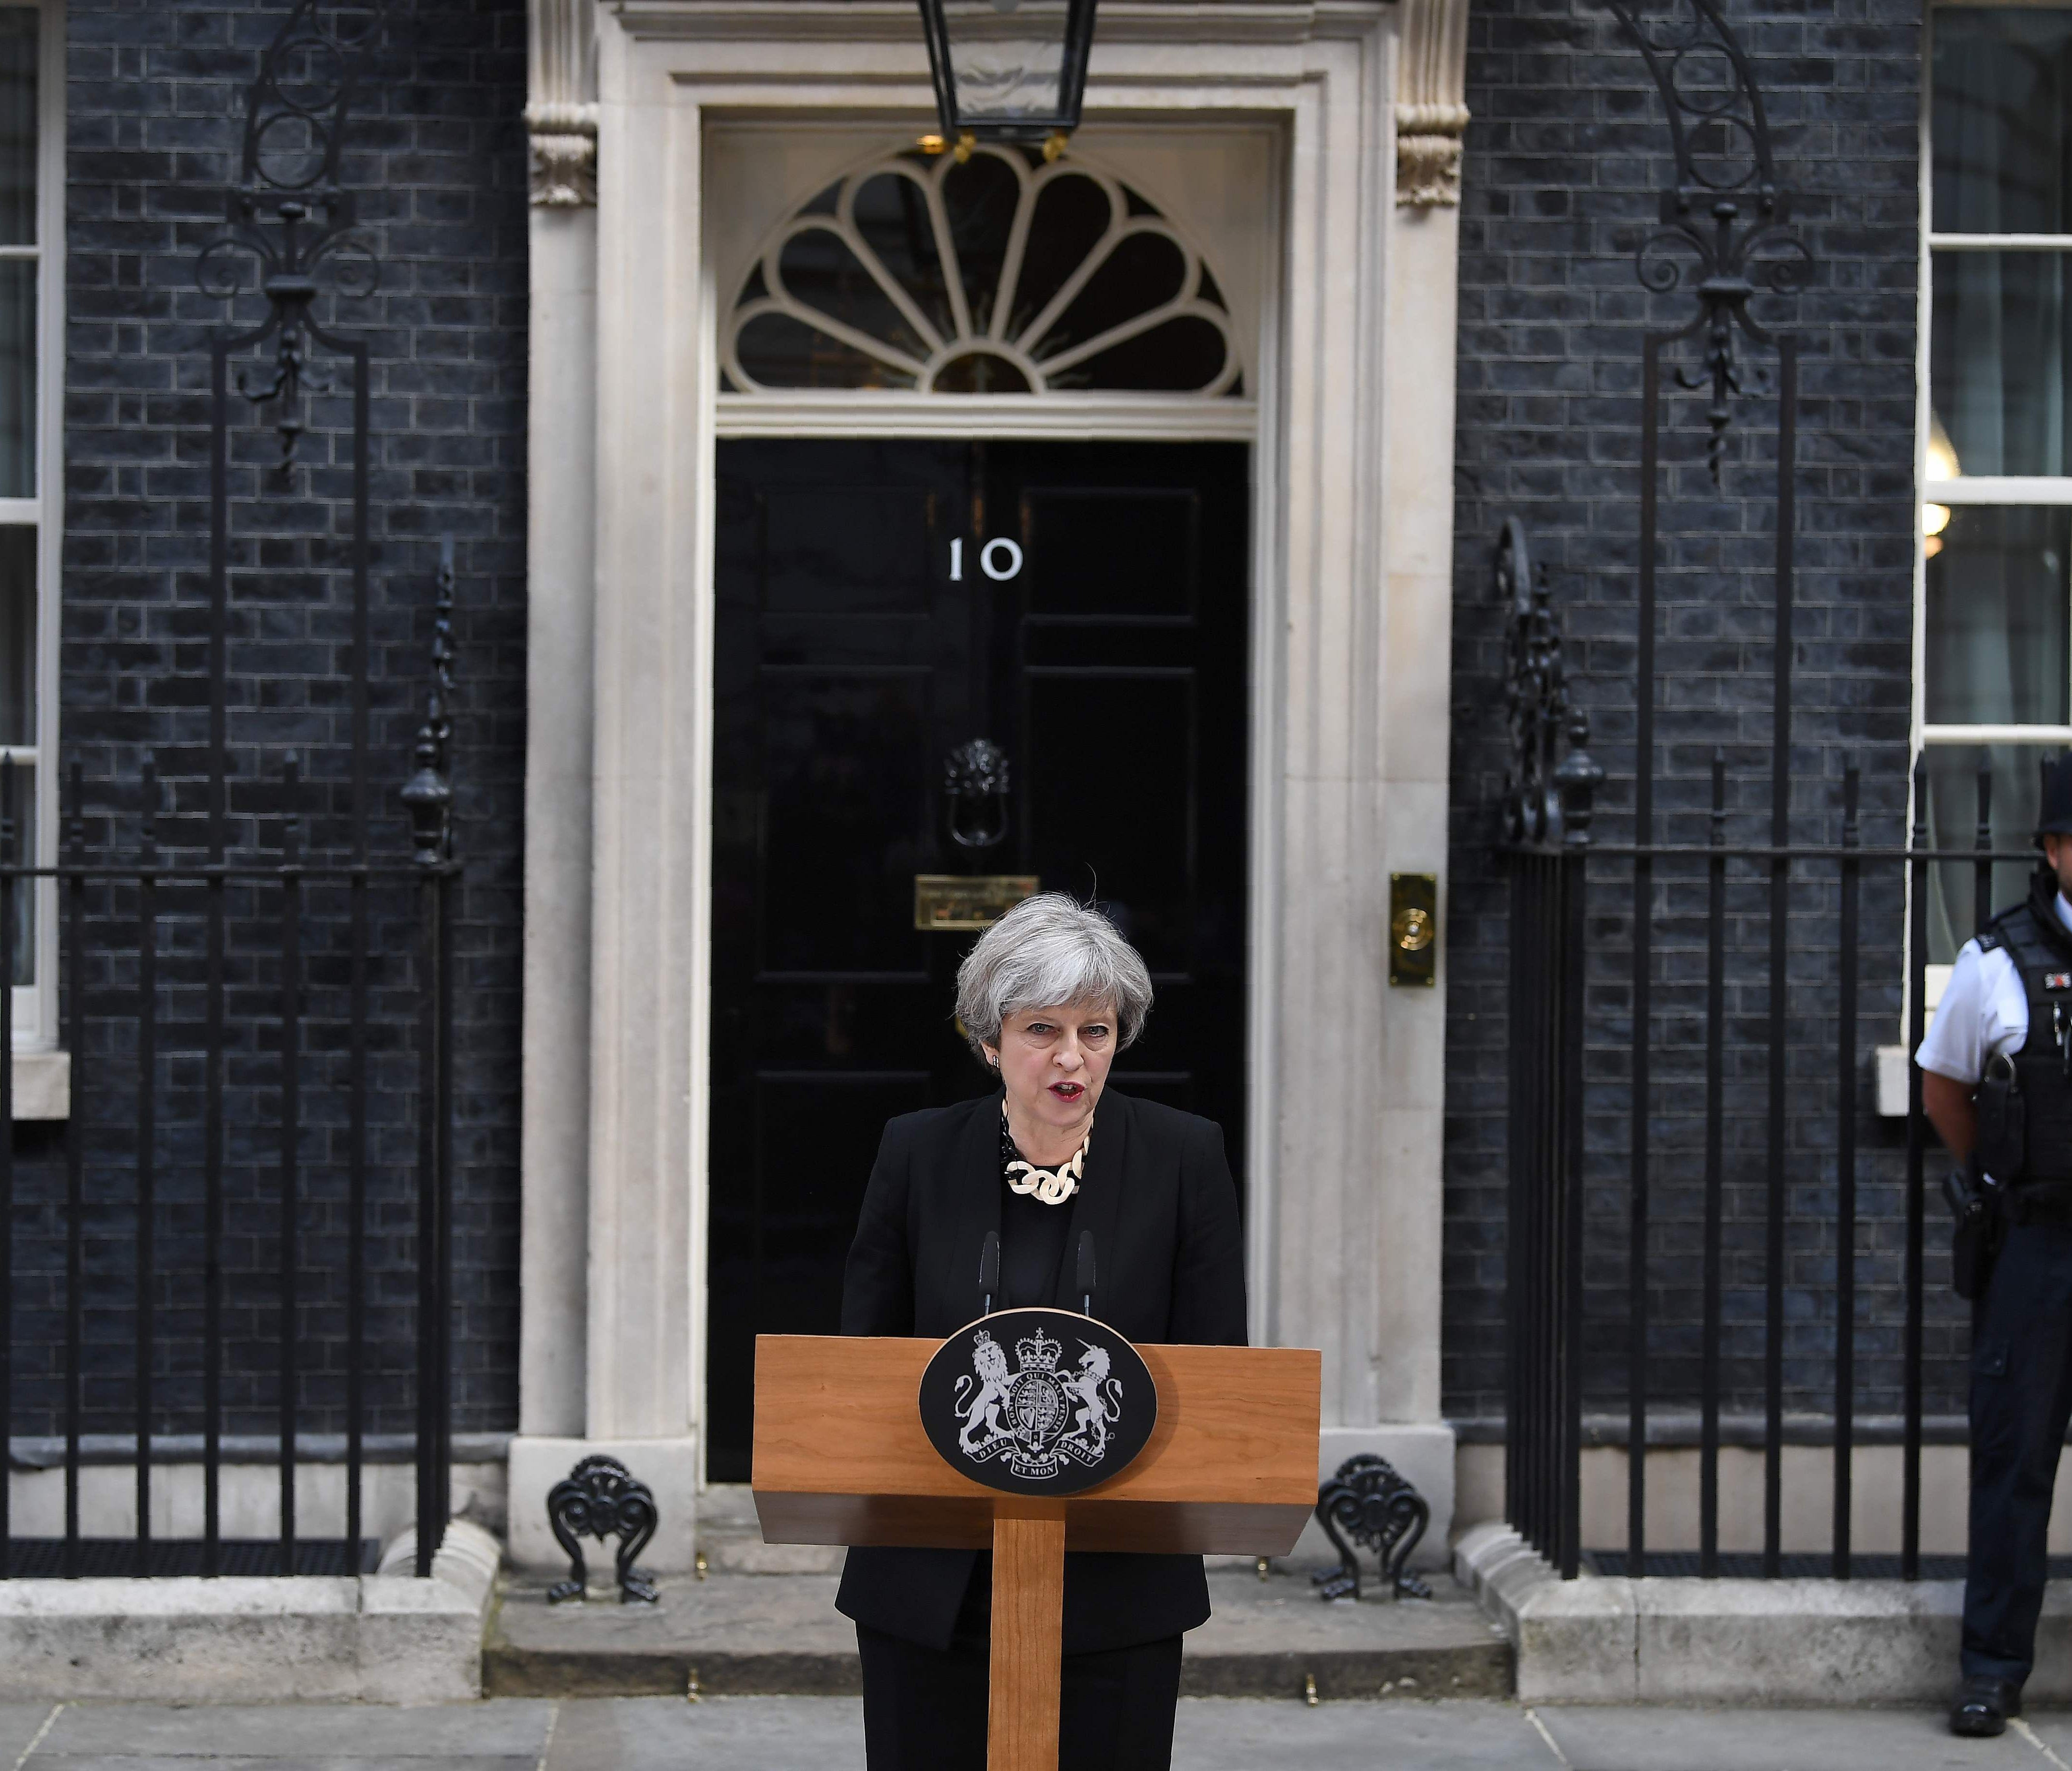 Britain's Prime Minister Theresa May delivers a statement outside 10 Downing Street in central London on June 4, 2017, following the June 3 terror attack. May said tougher Internet regulation was need to prevent terrorist activity online.